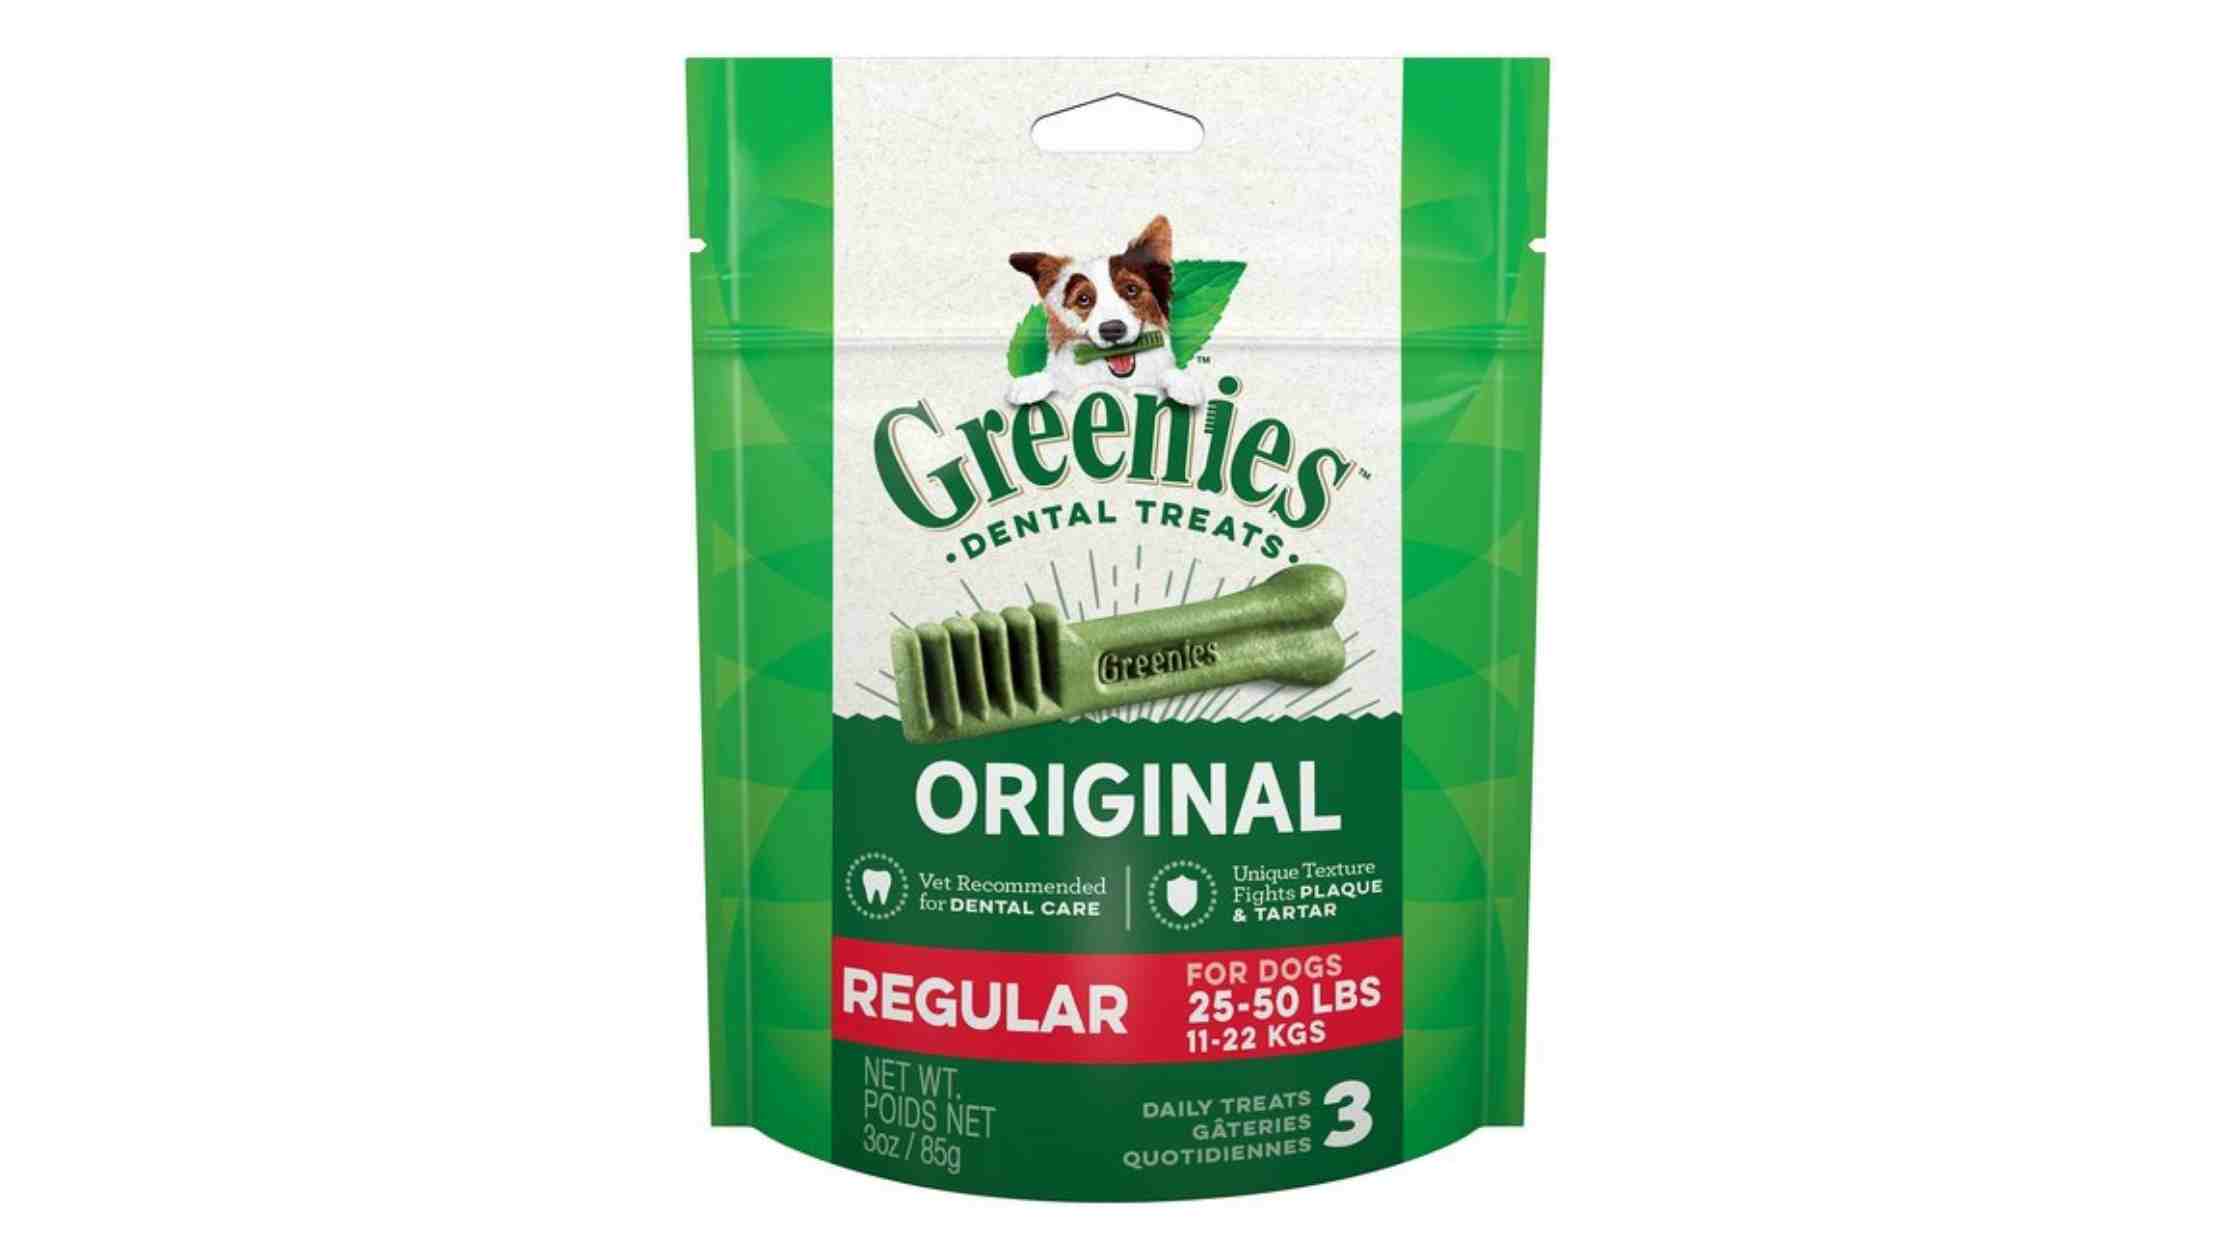 Are Greenies Good for Cats